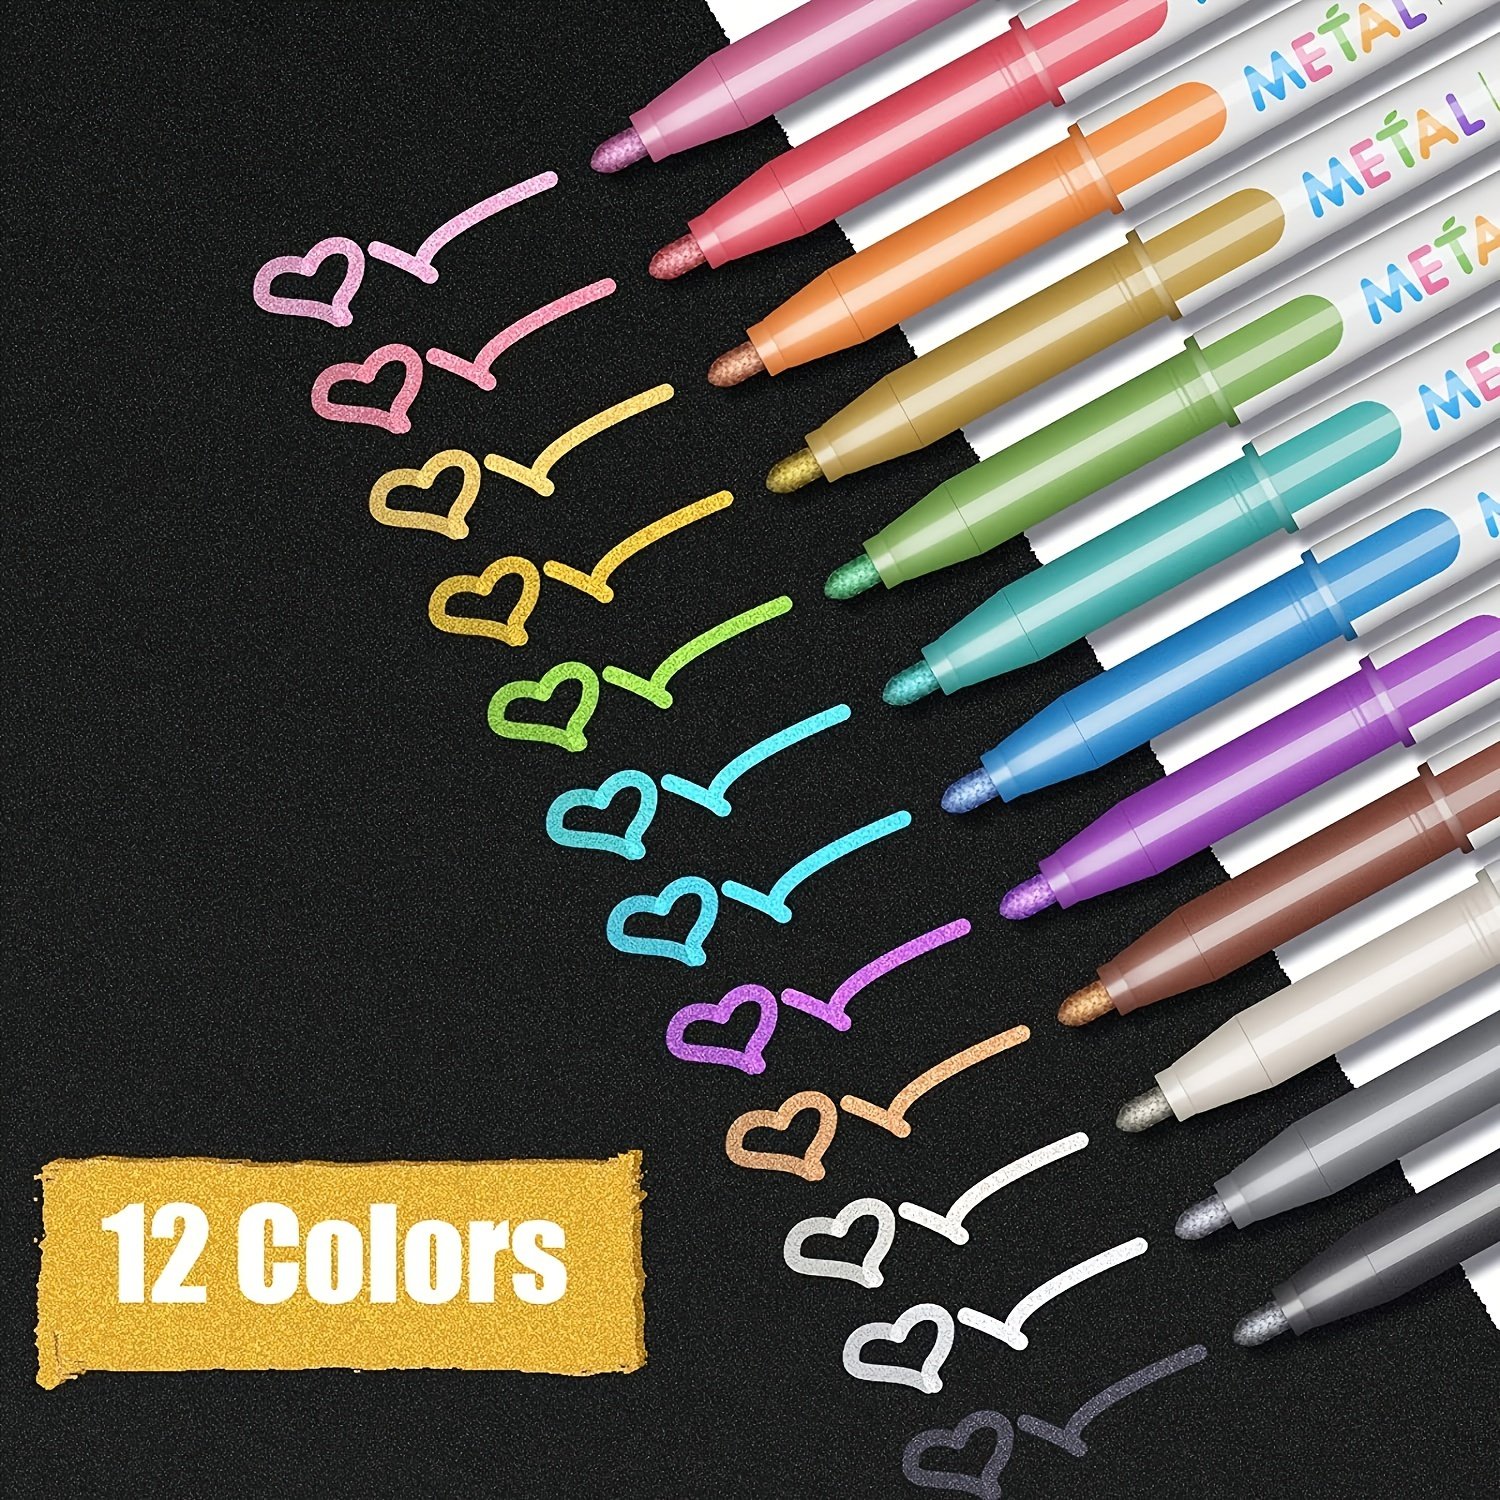 Caliart 72 Double Tip Brush Pens Art Markers, Artist Fine & Brush Pen Coloring  Markers for Kids Adult Book Halloween Journaling